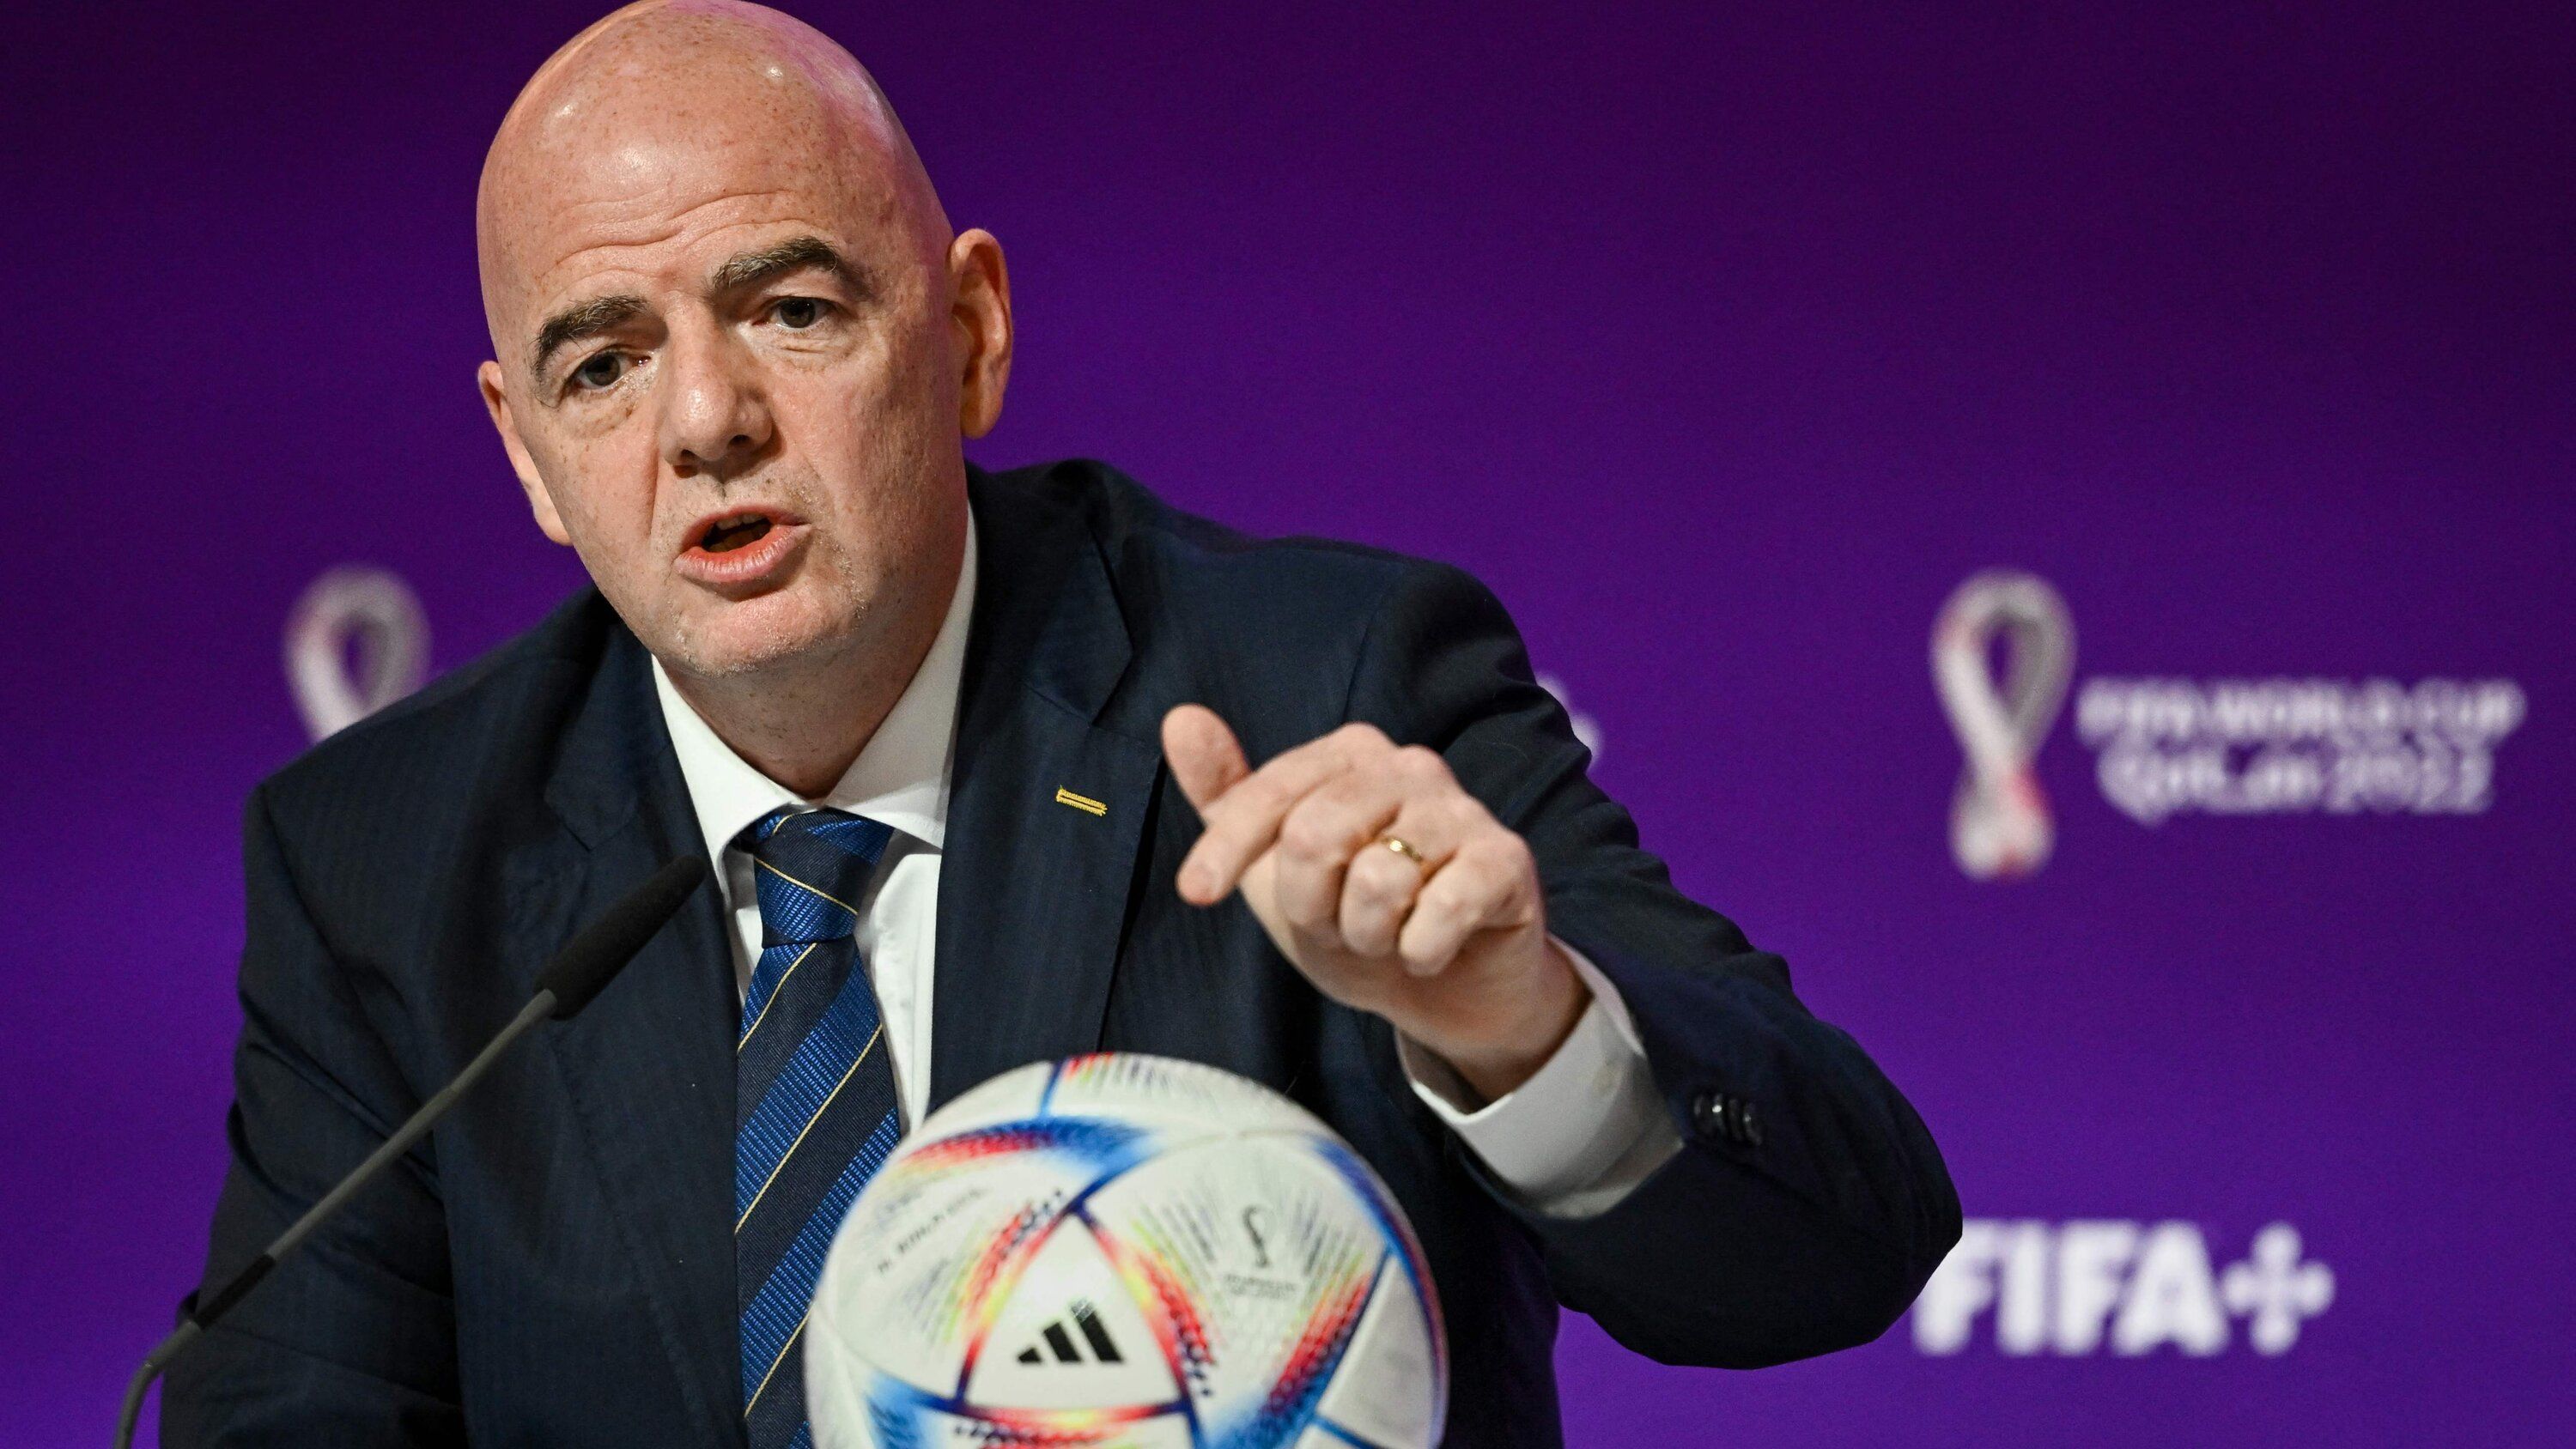 FIFA President Infantino forbids showing him looking at his phone on broadcasts of World Cup matches